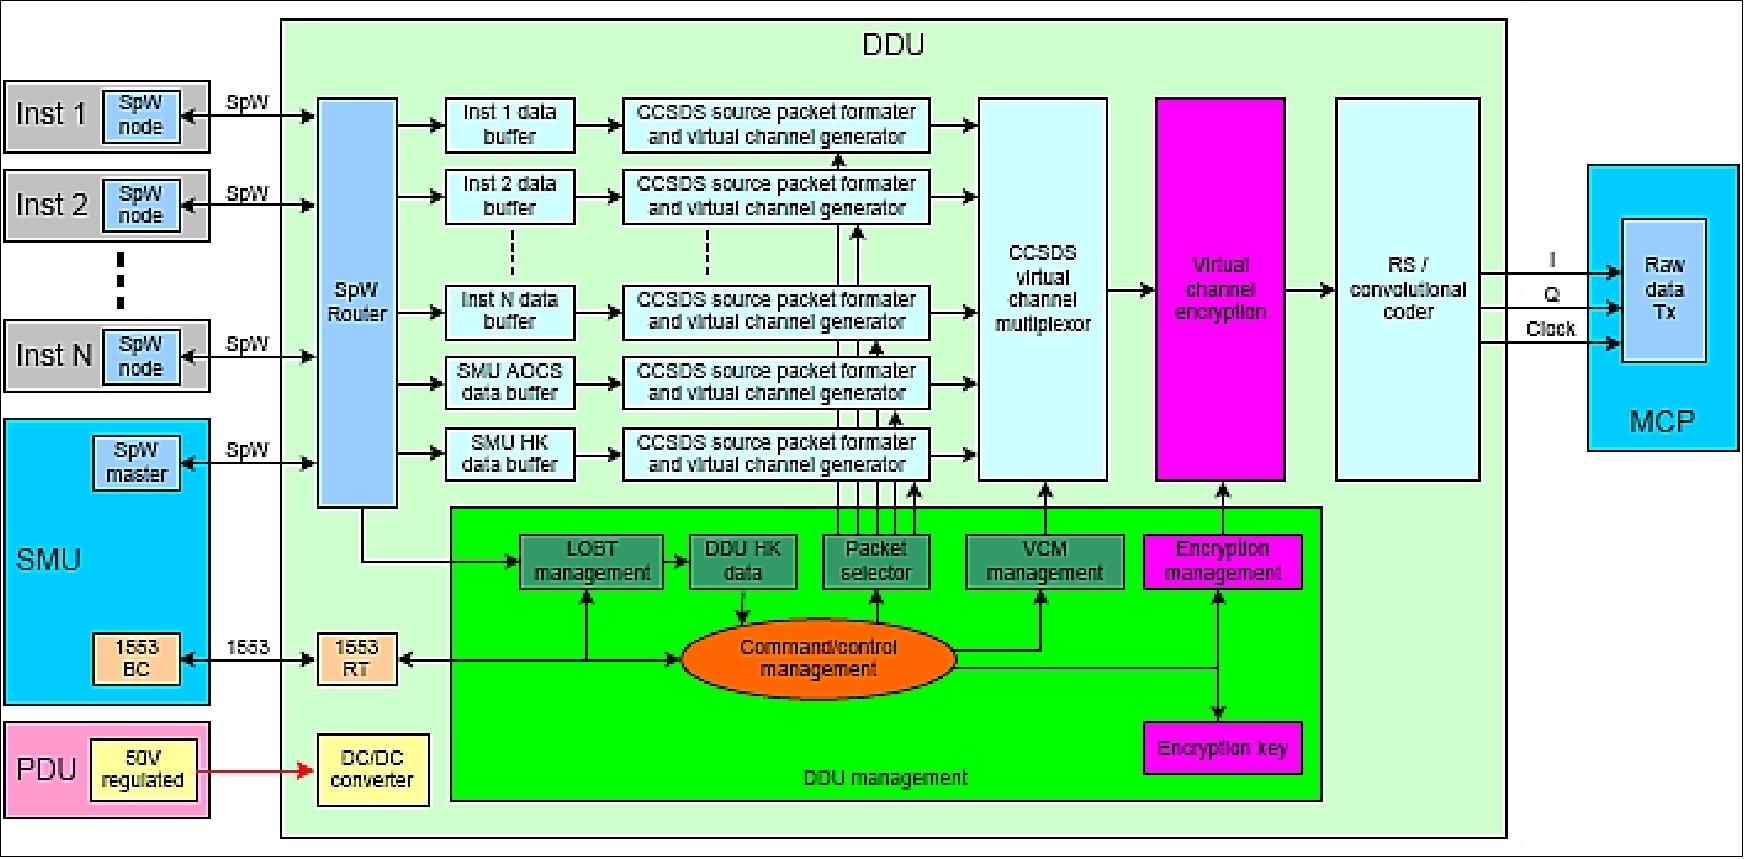 Figure 9: Schematic view of the DDU (Data Distribution Unit) within the on-board SpW configuration (image credit: TAS)